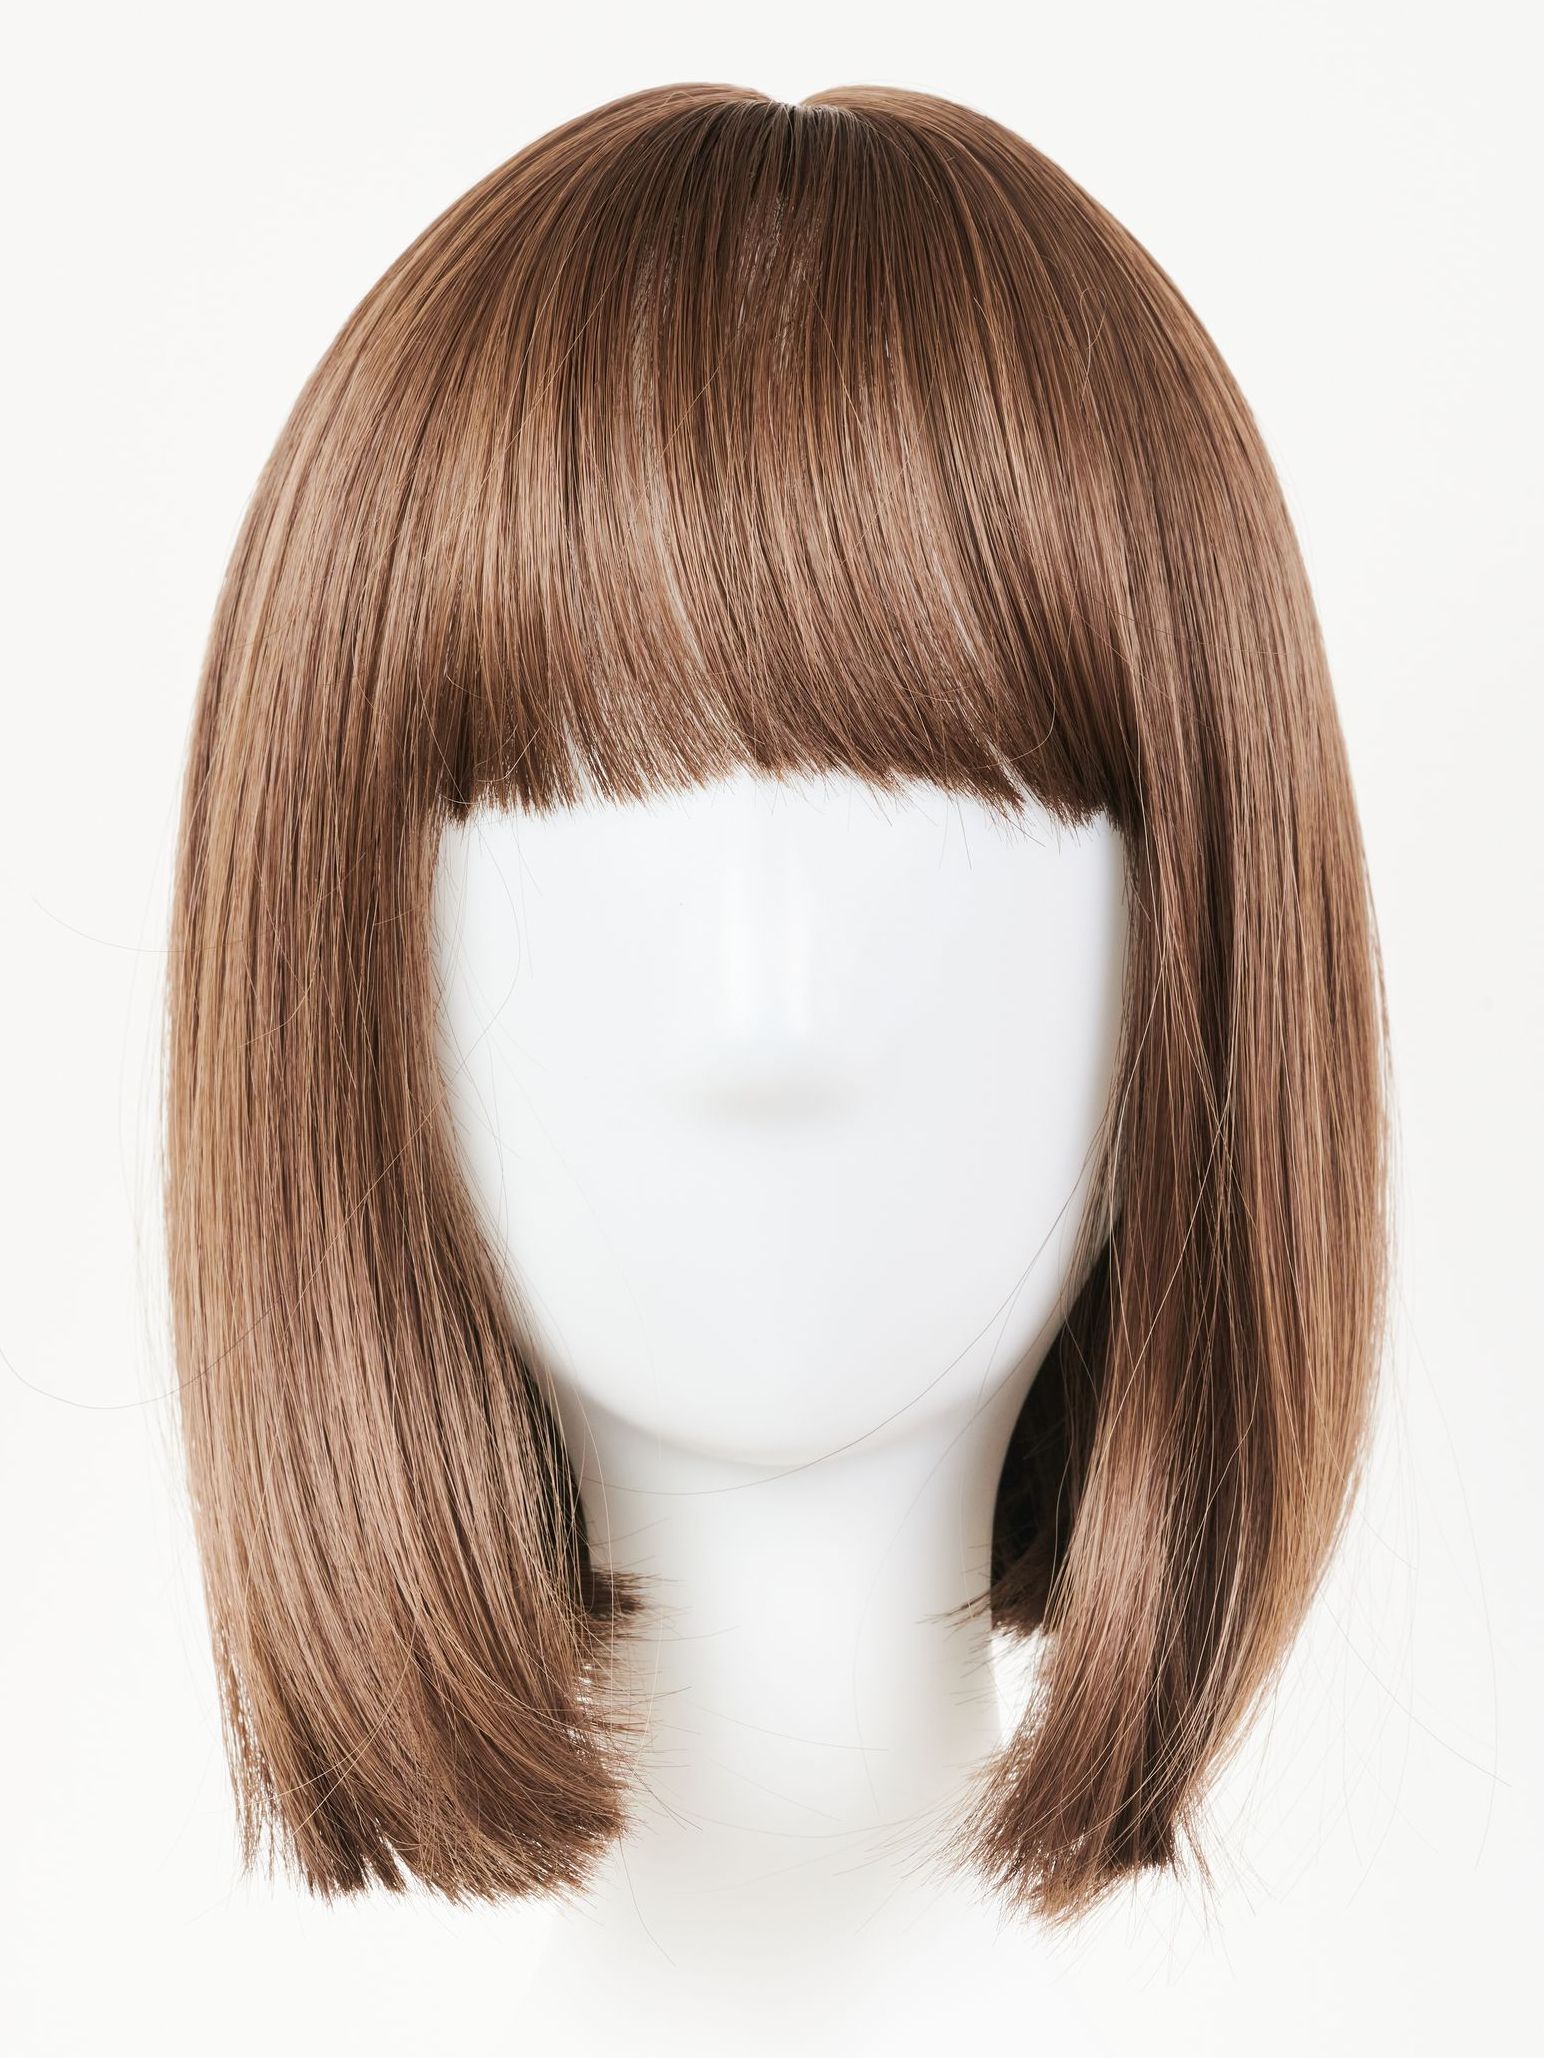 a wig with bangs is on a mannequin head